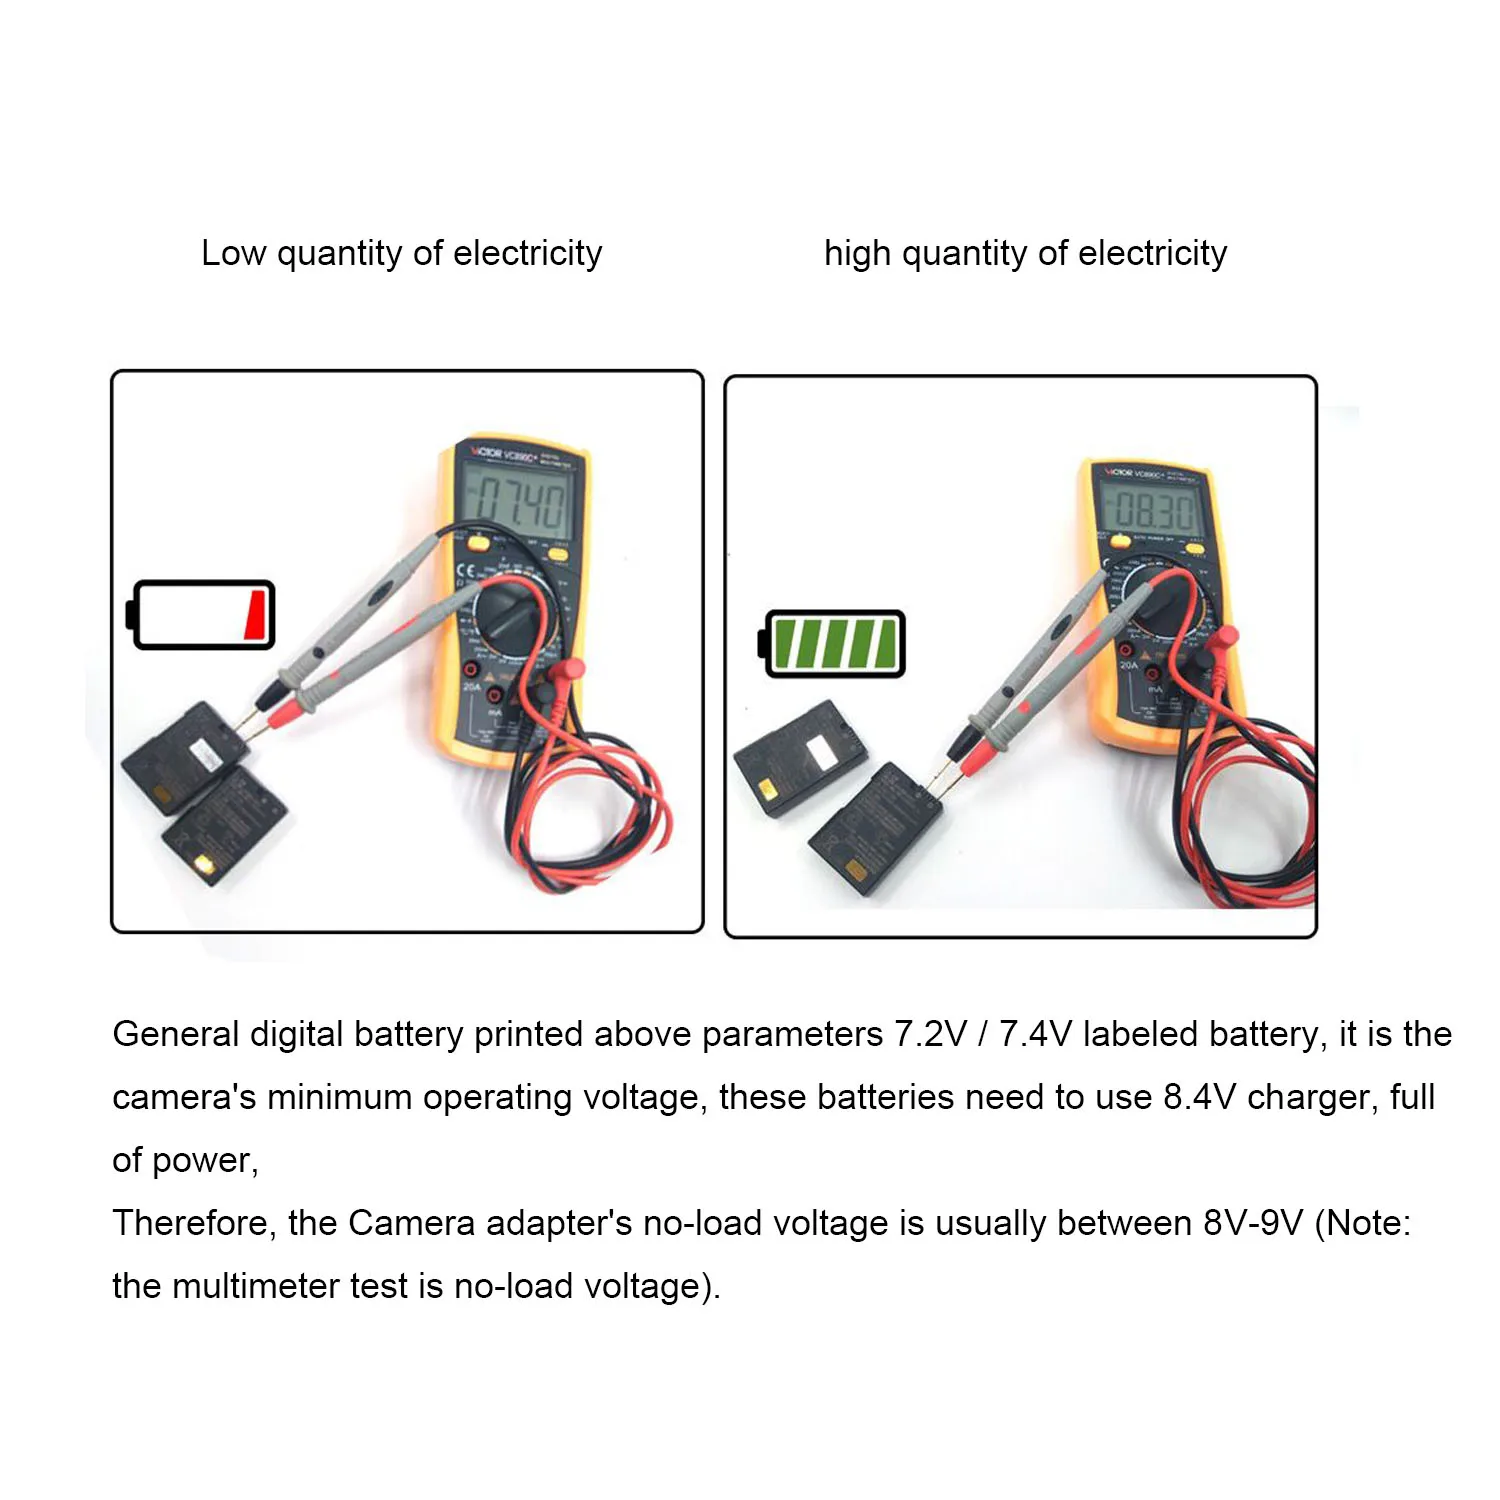 Including USB Cable MD. 2x Battery NB-2L for EOS 350D 400D / Rebel XTi / DC.. PATONA Dual Quick-Charger MV..